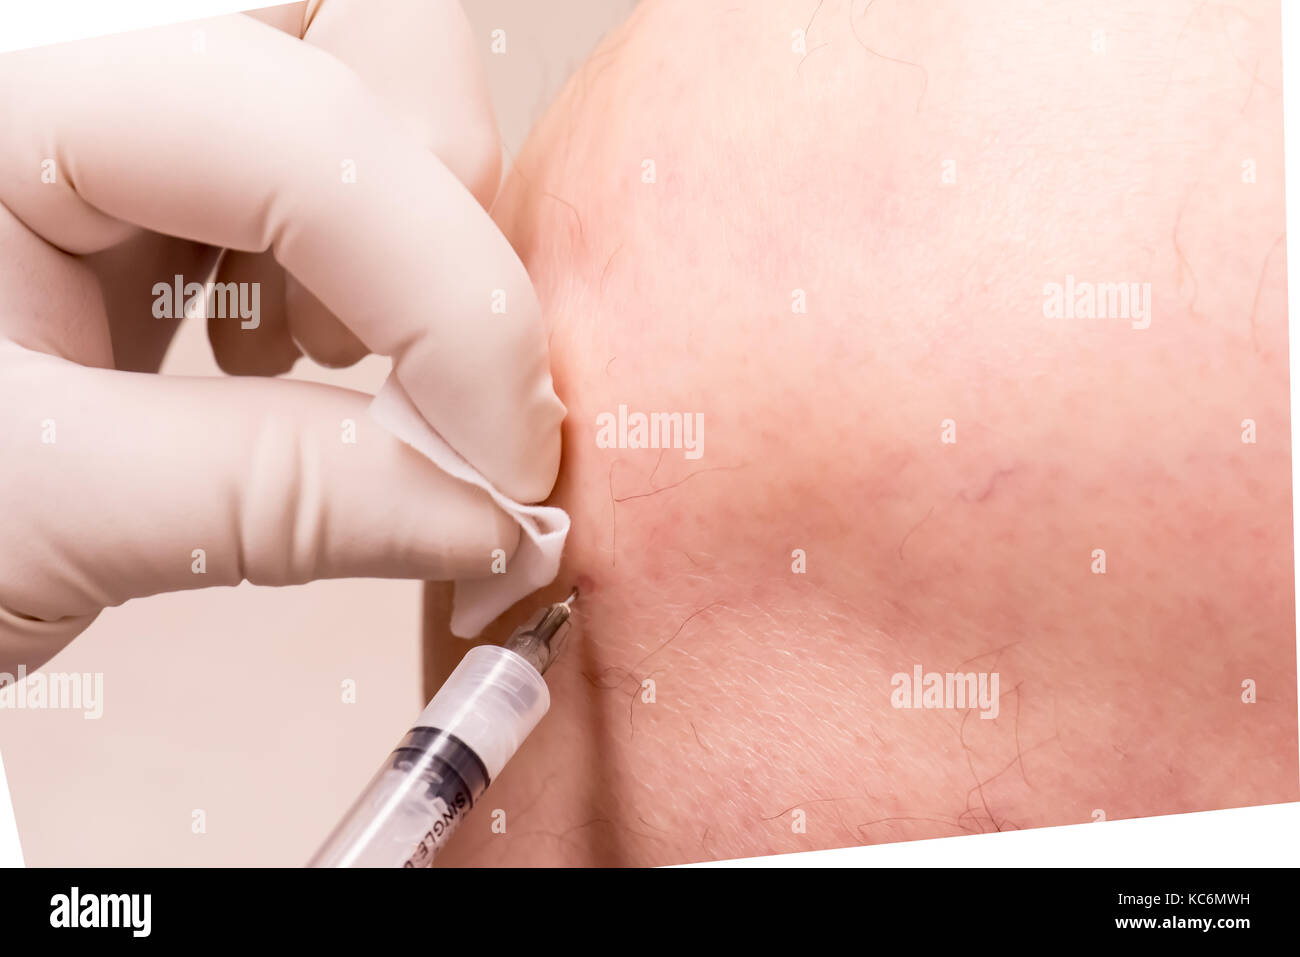 knee injection of prp Stock Photo